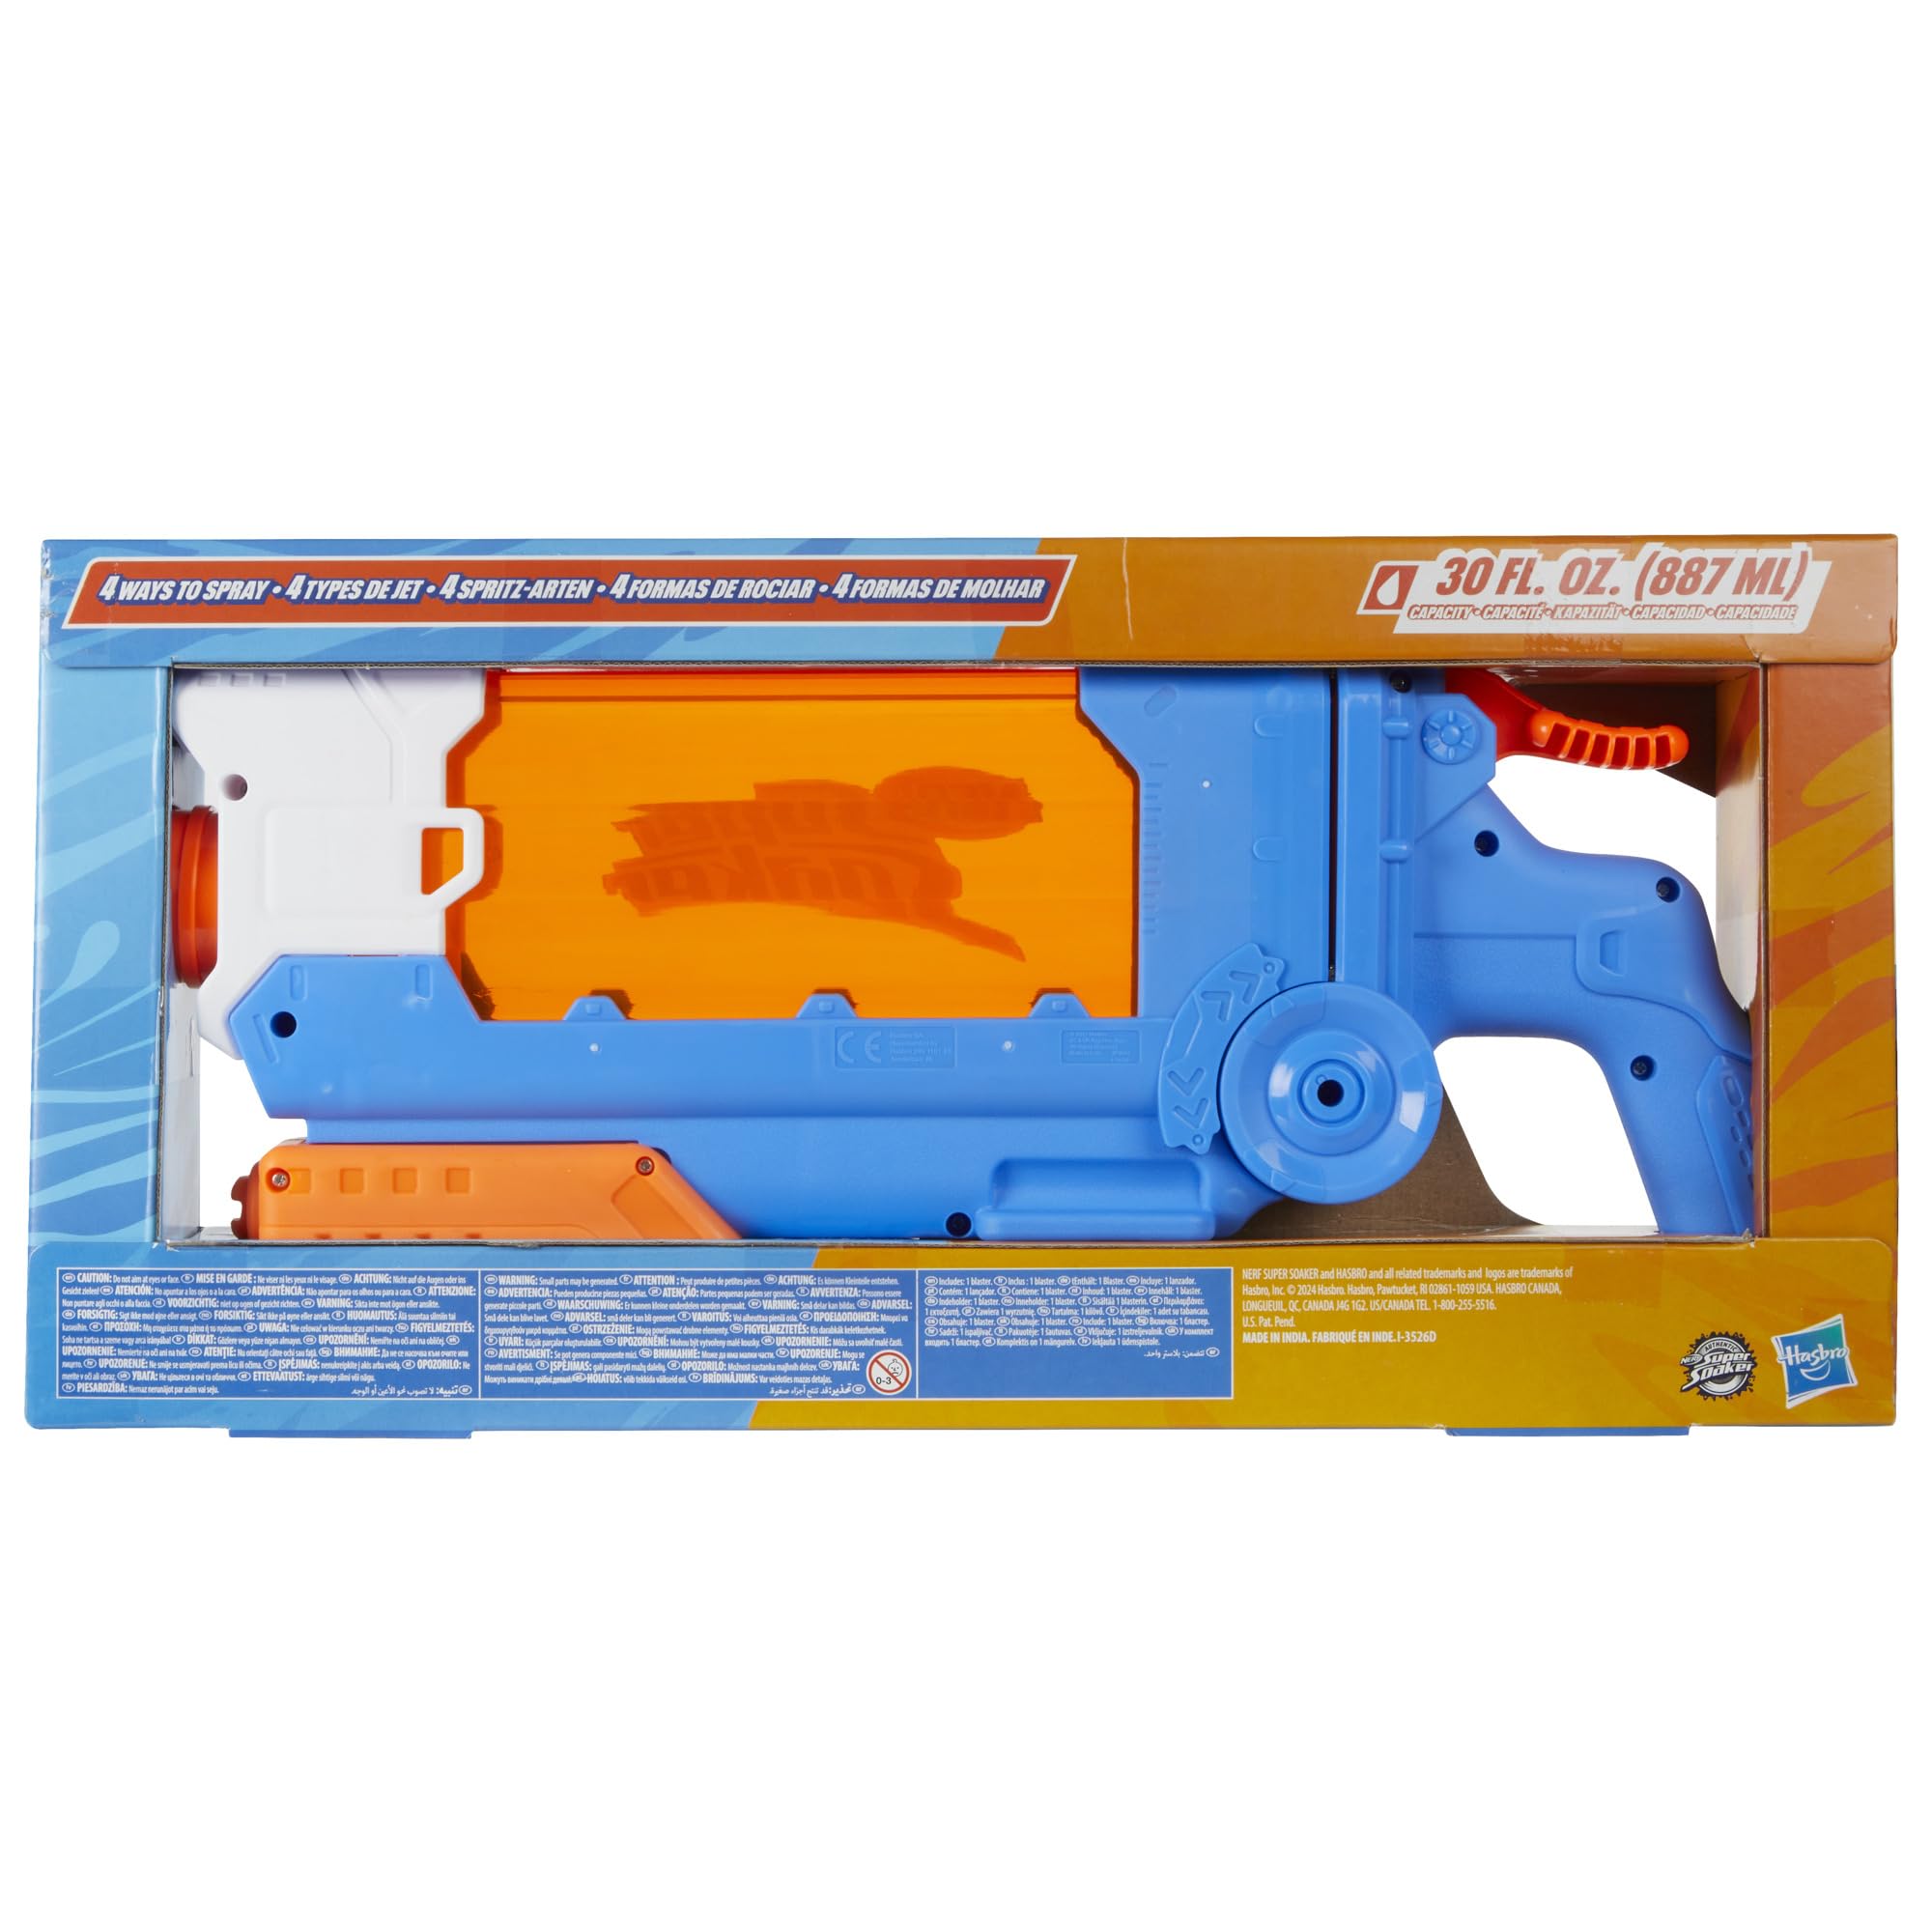 NERF Super Soaker Flip Fill Water Blaster, 4 Spray Styles, Fast Fill, 30 Fluid Ounce Tank, Water Toys for 6 Year Old Boys & Girls & Up